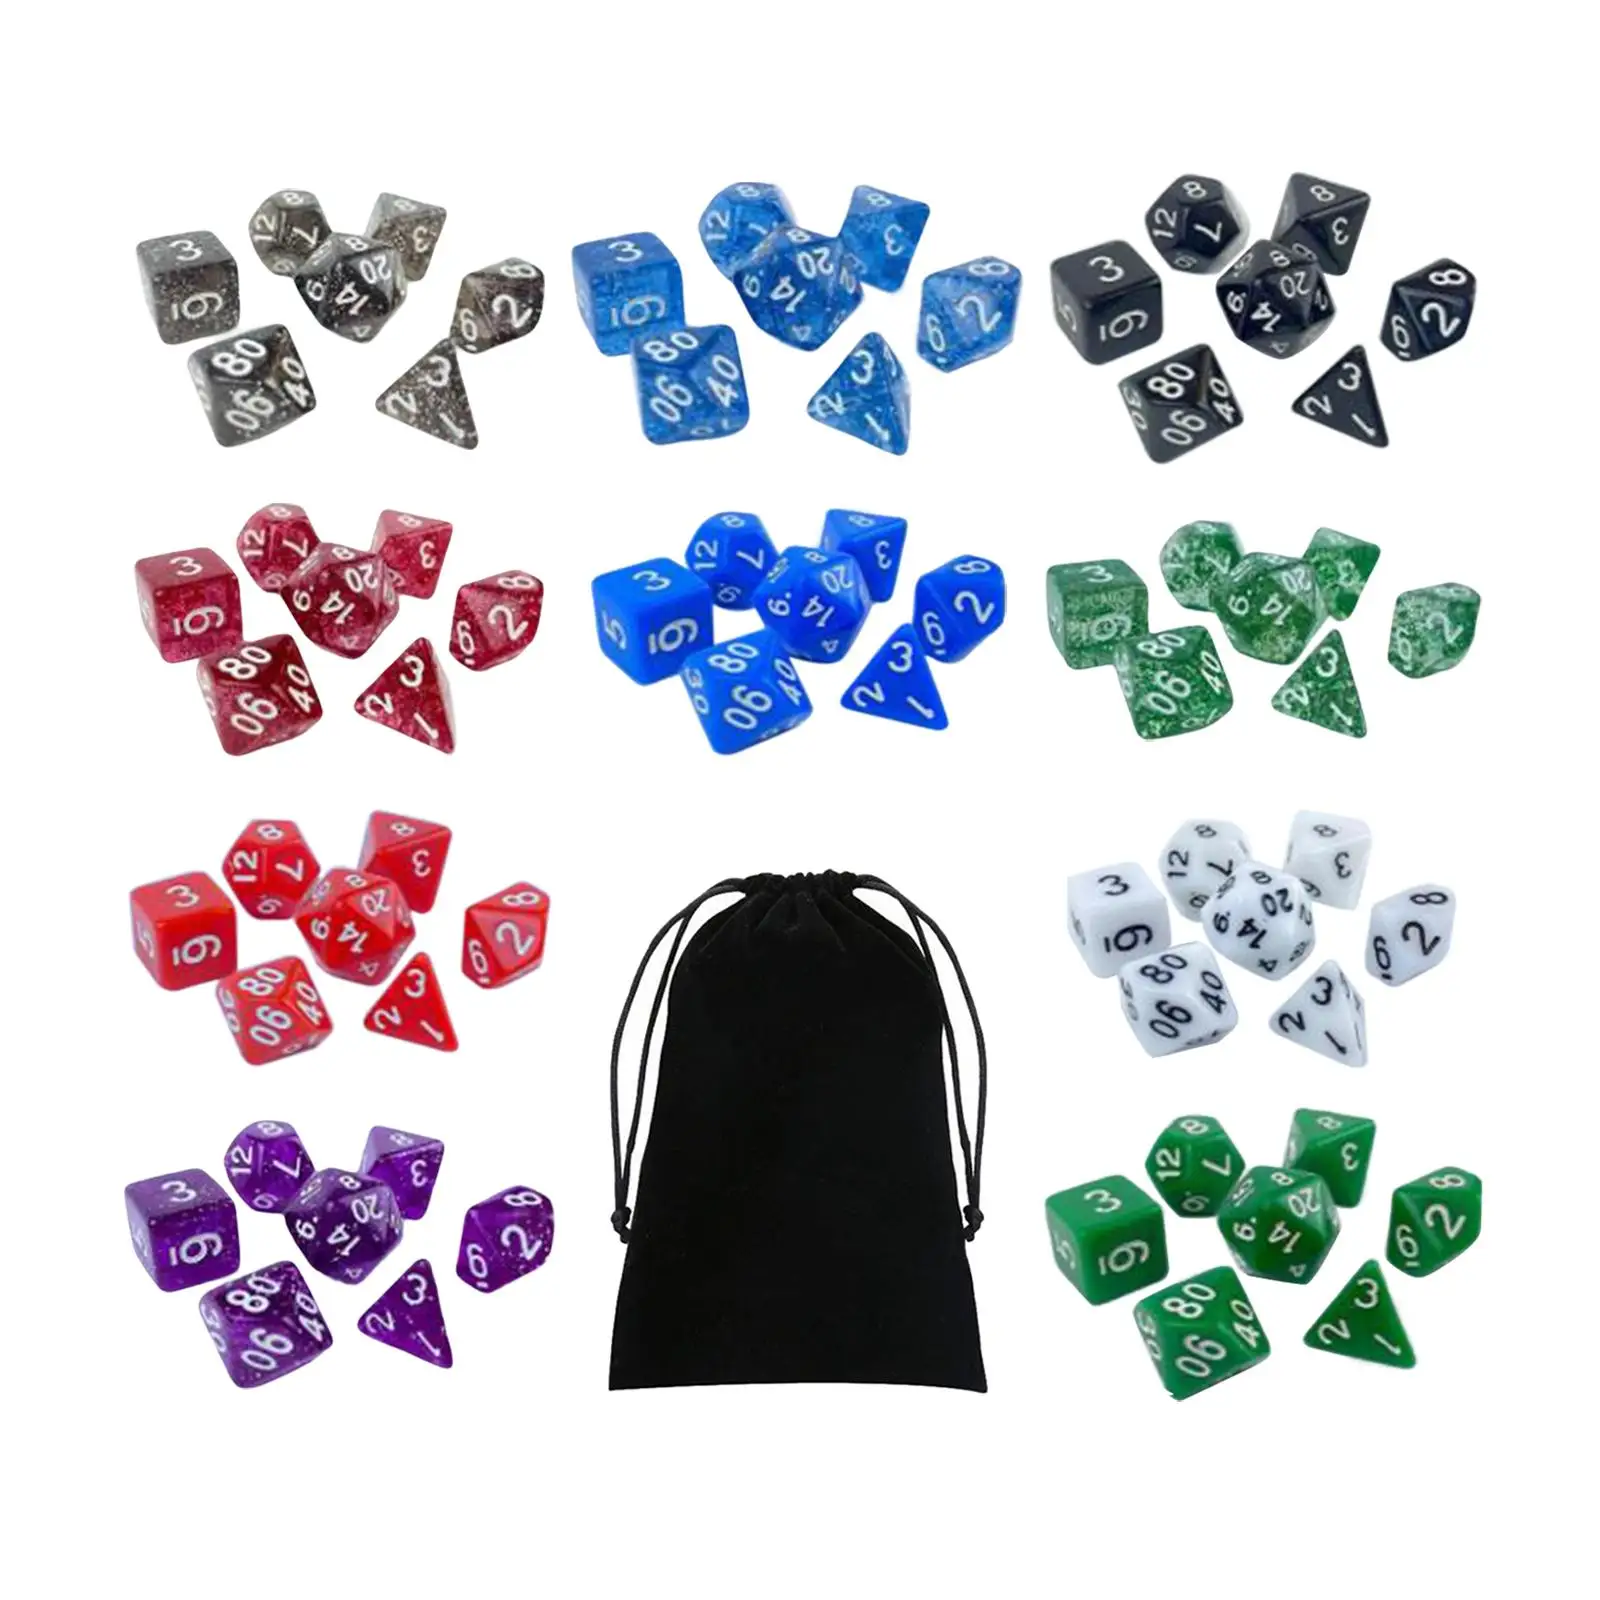  Acrylic Polyhedral Dice Set, Entertainment Toy with Storage Bag, Board